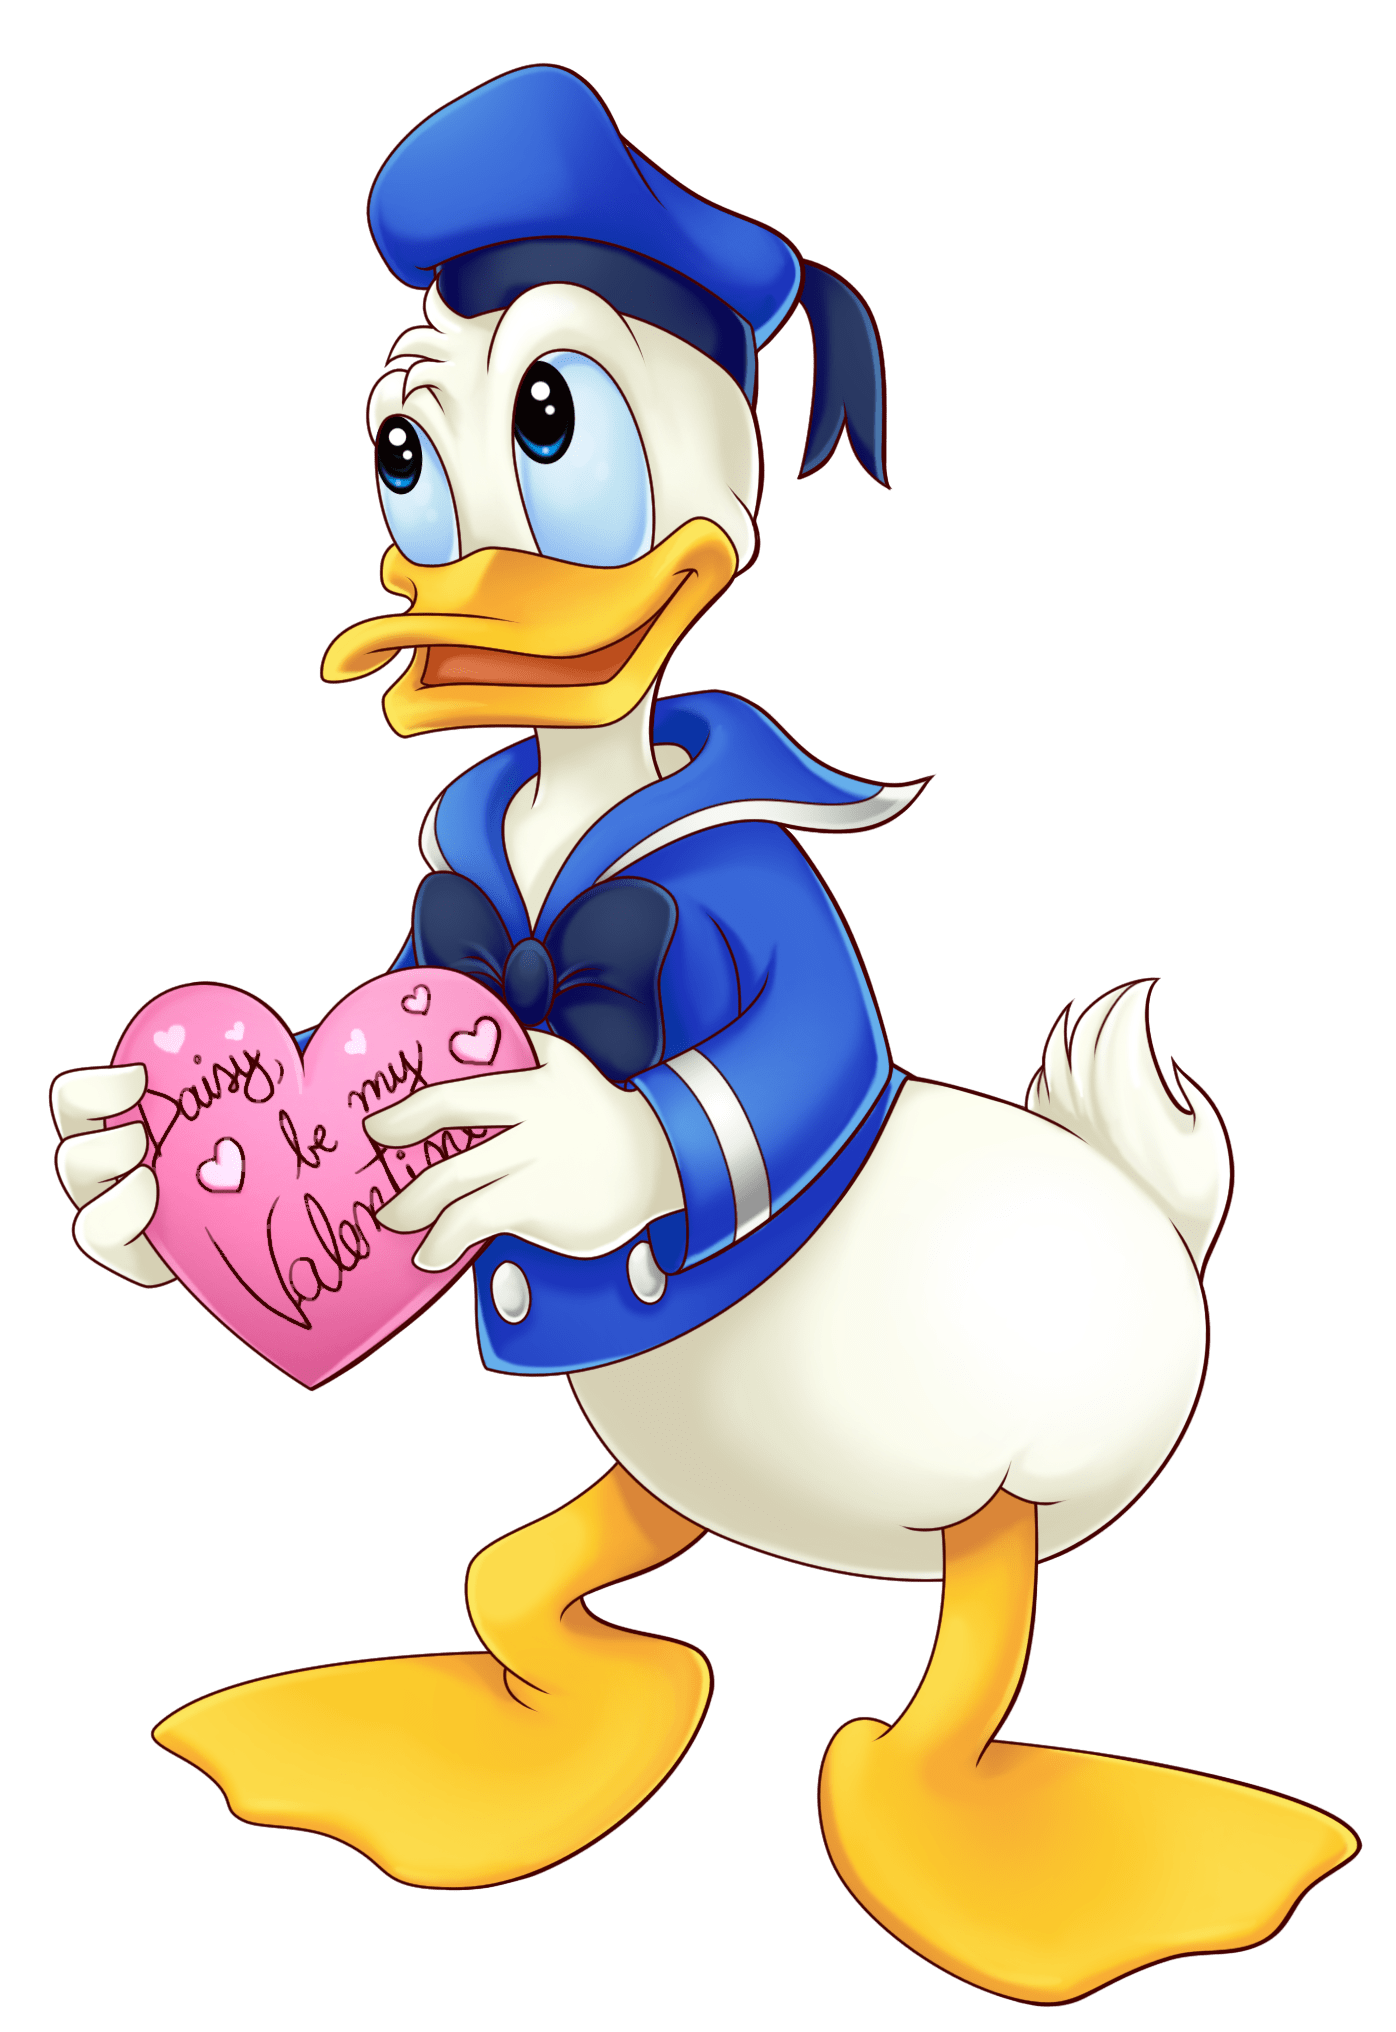 Donald duck in love. Ducks clipart animated